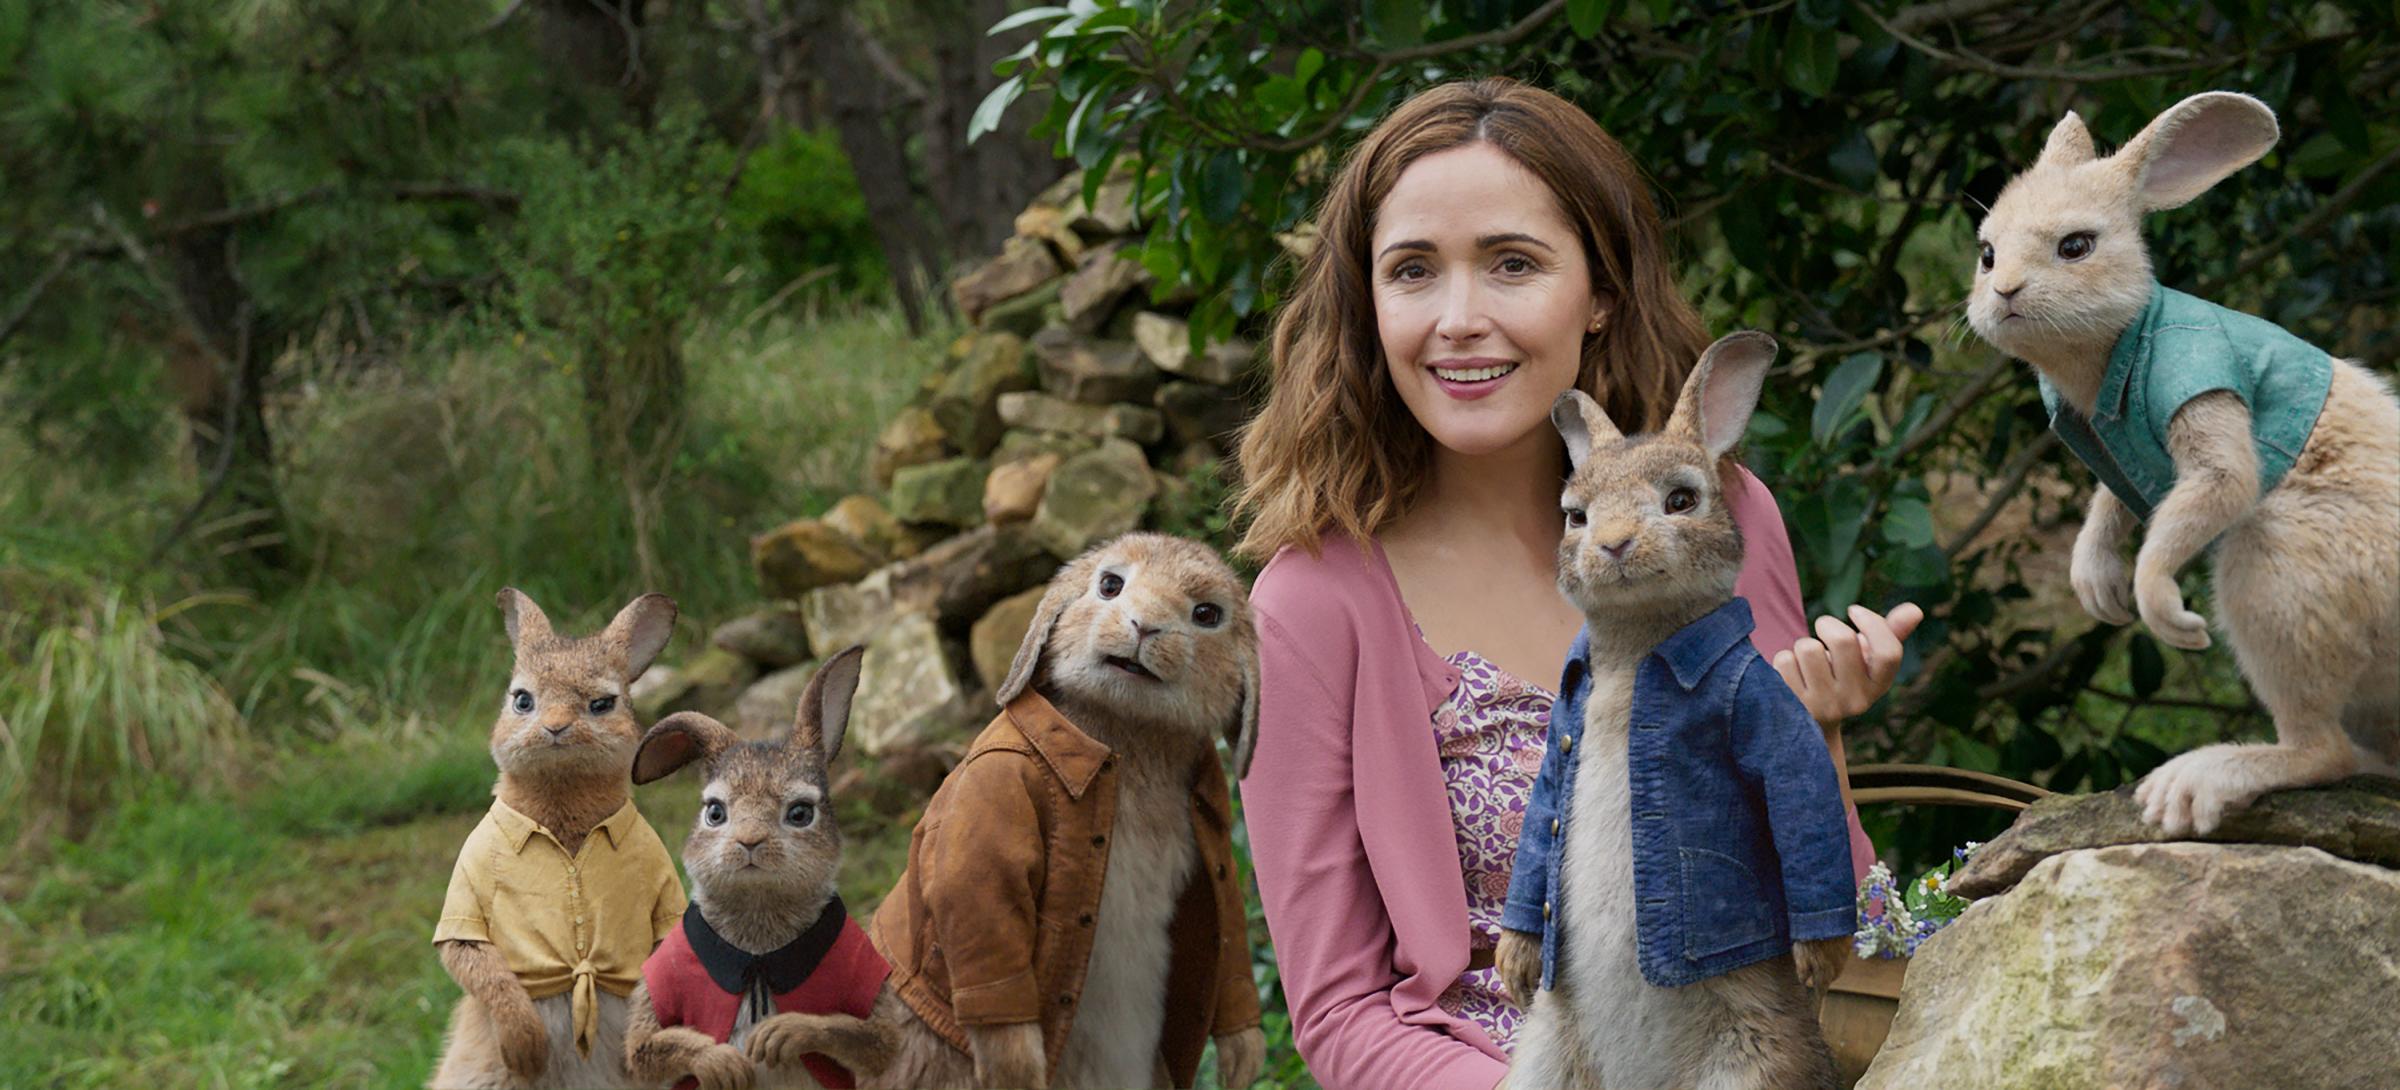 Cumbria:Peter Rabbit was filmed in different Lake District locations 